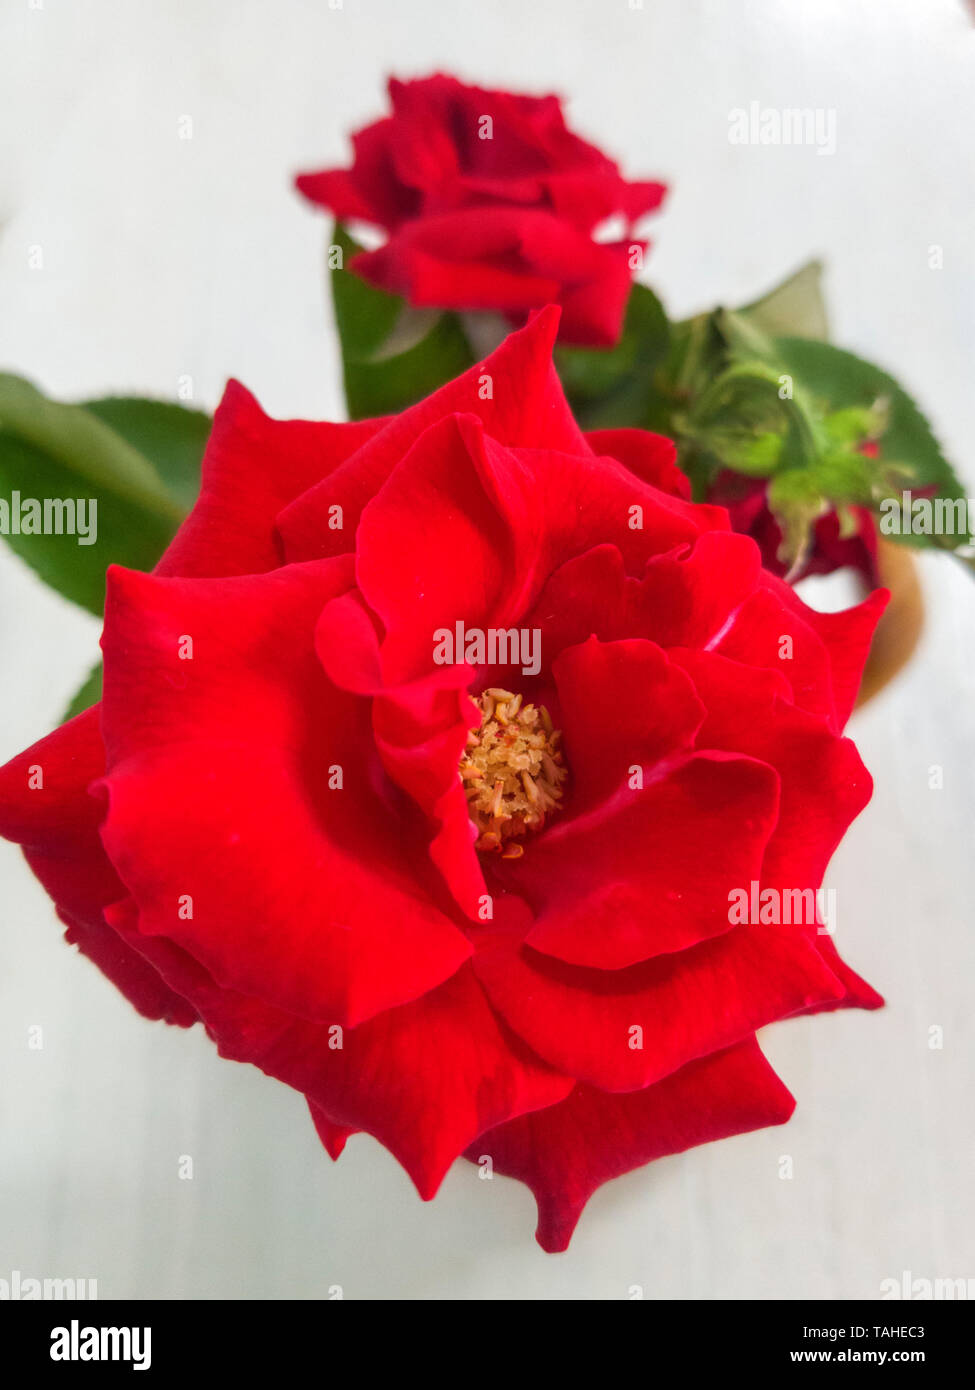 garden rose in a glass with water Stock Photo